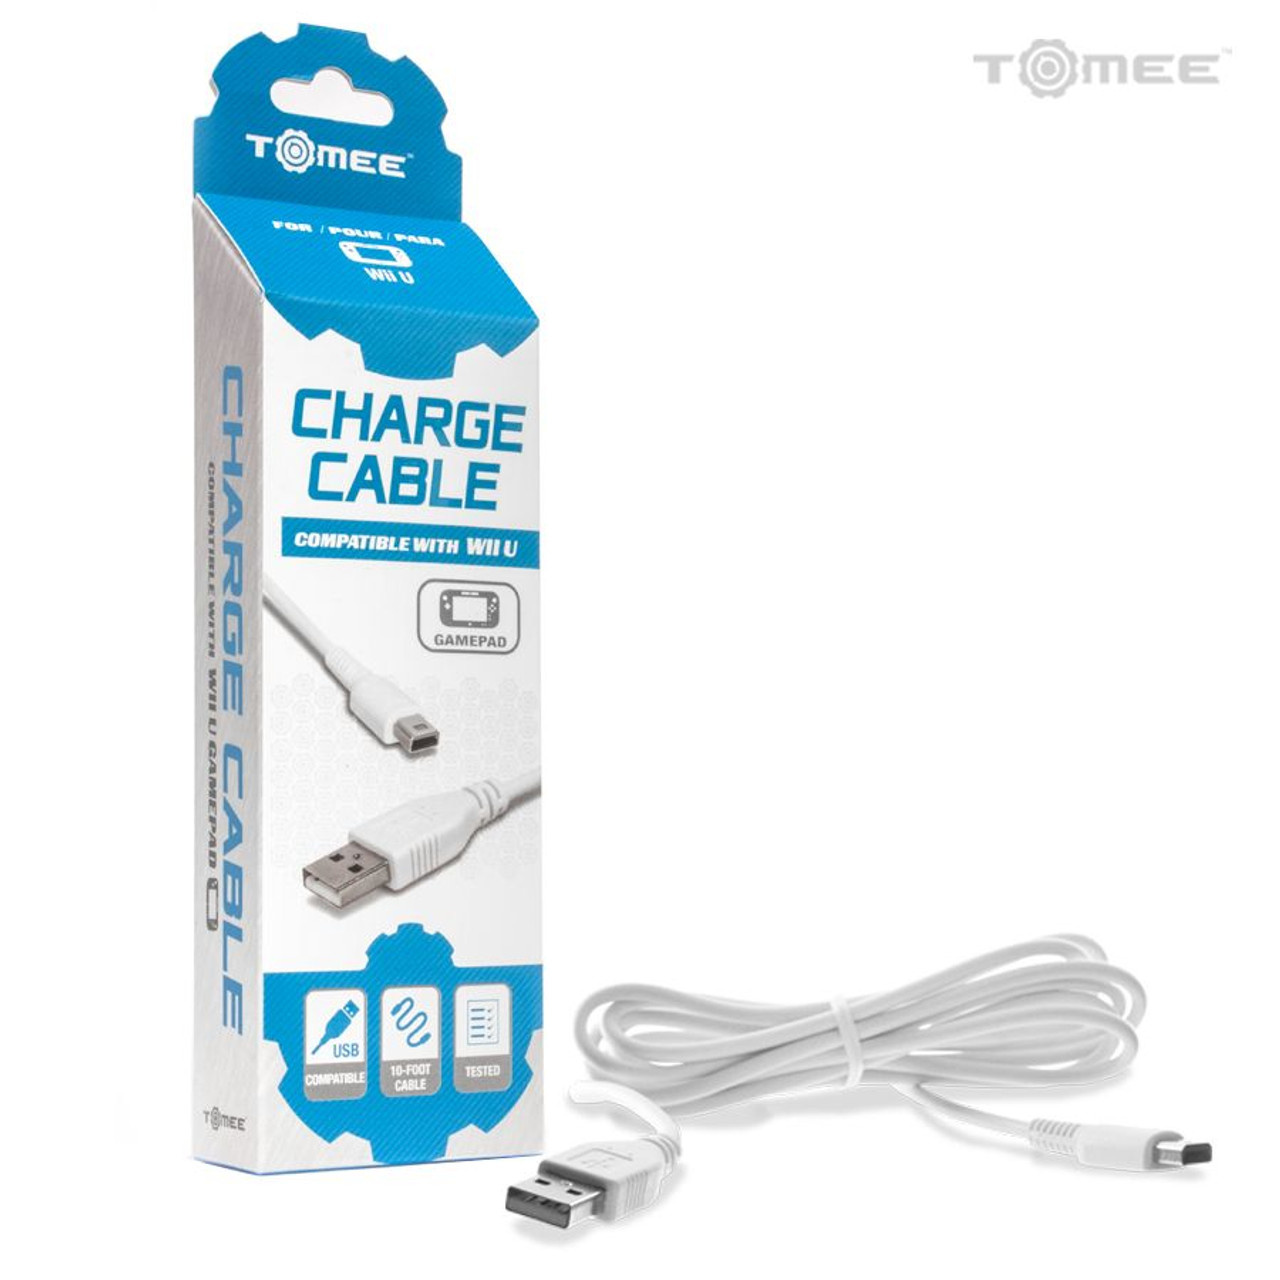 Charge Cable for Wii U GamePad - Tomee - Stone Age Gamer